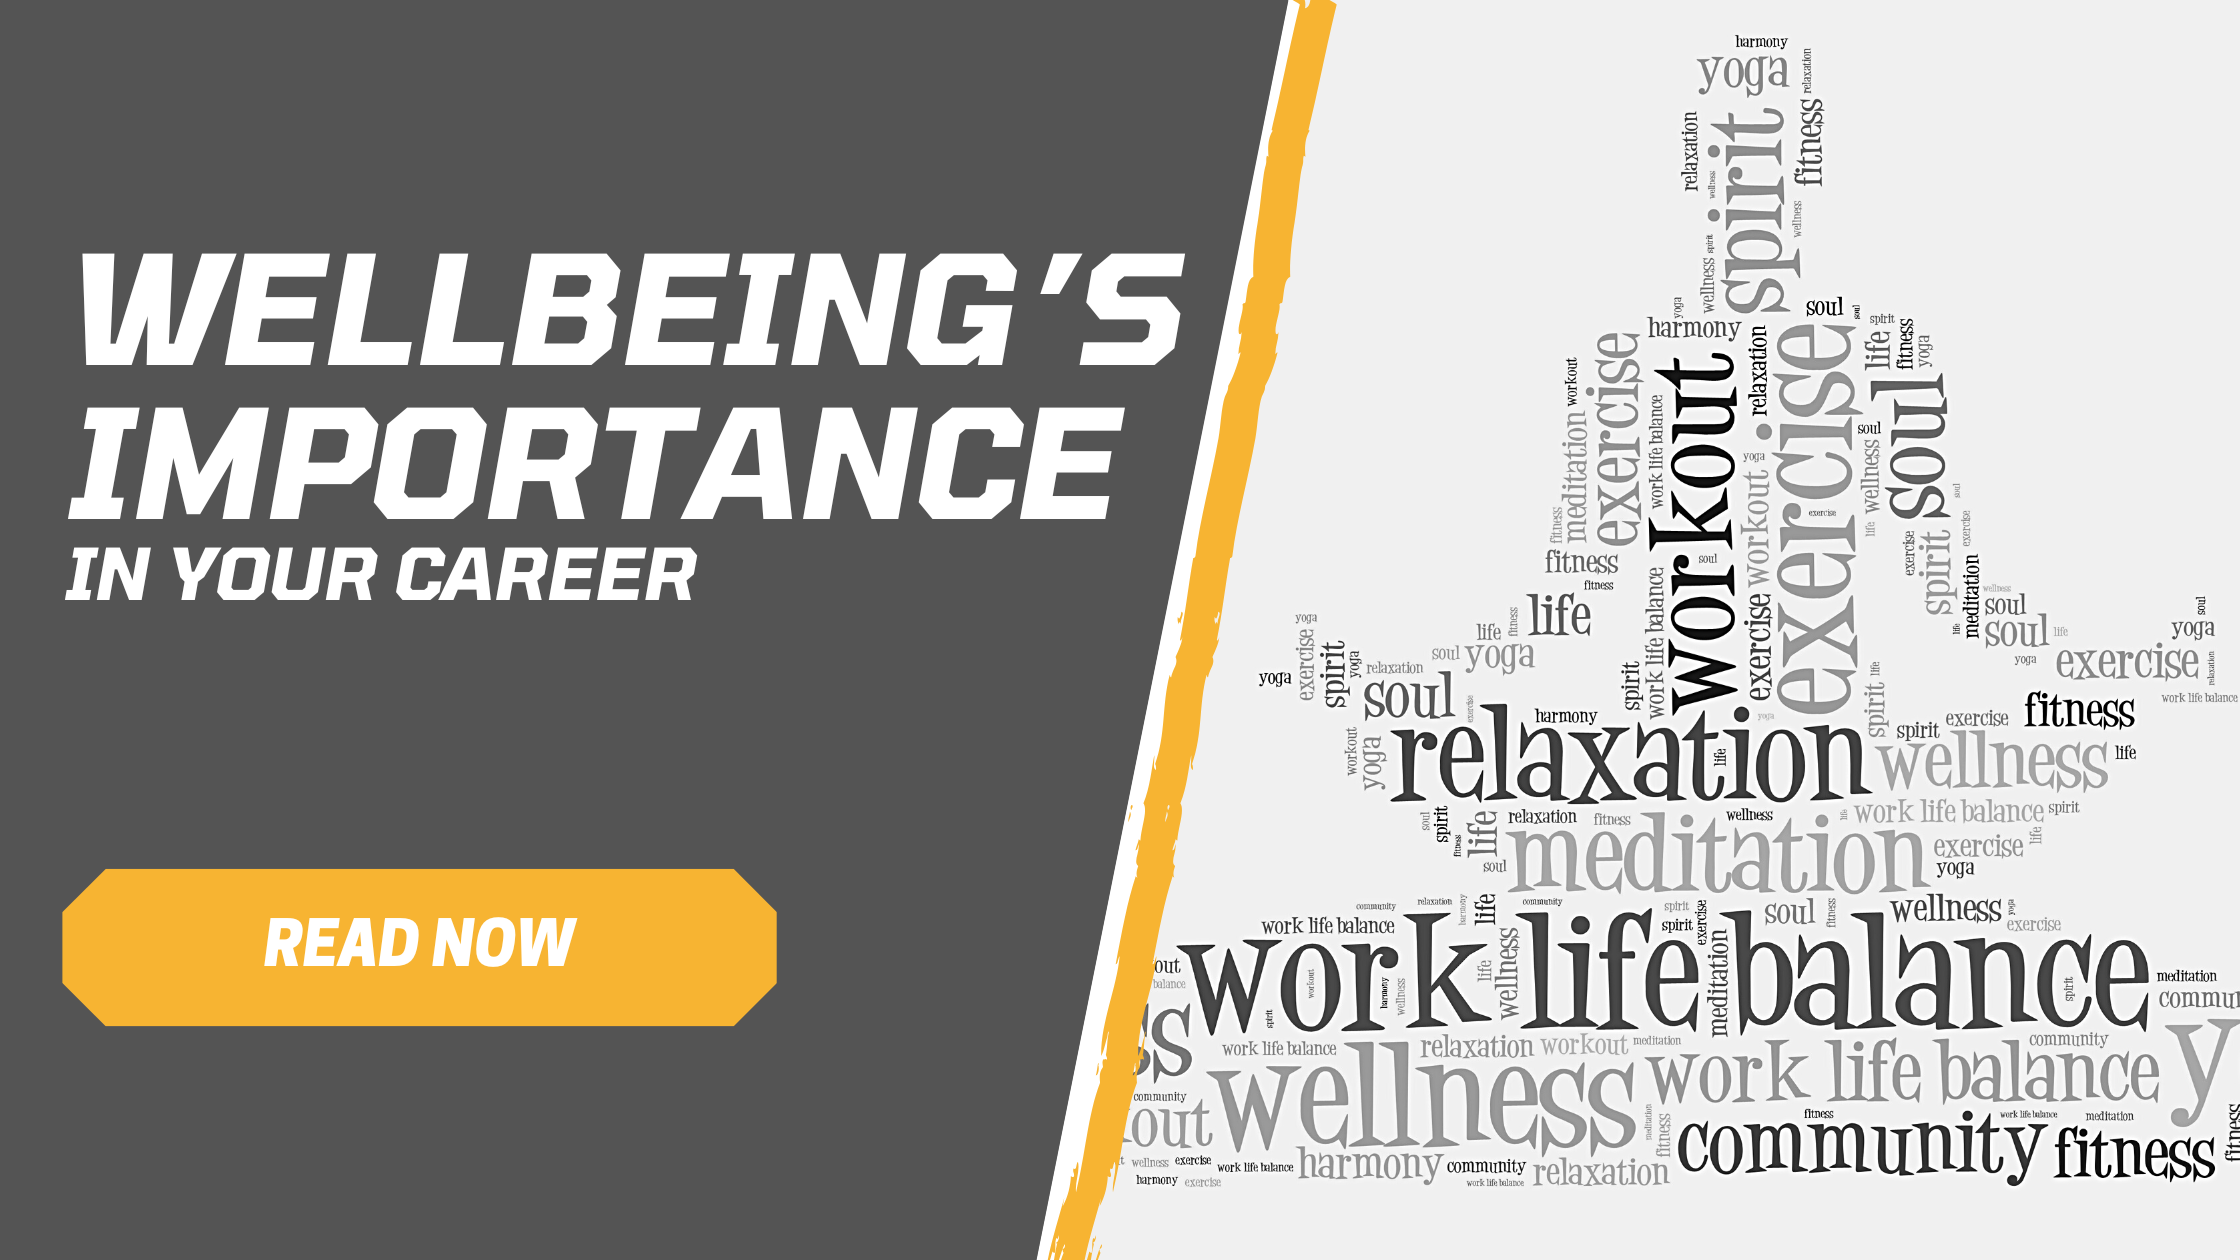 Wellbeing’s importance in your career